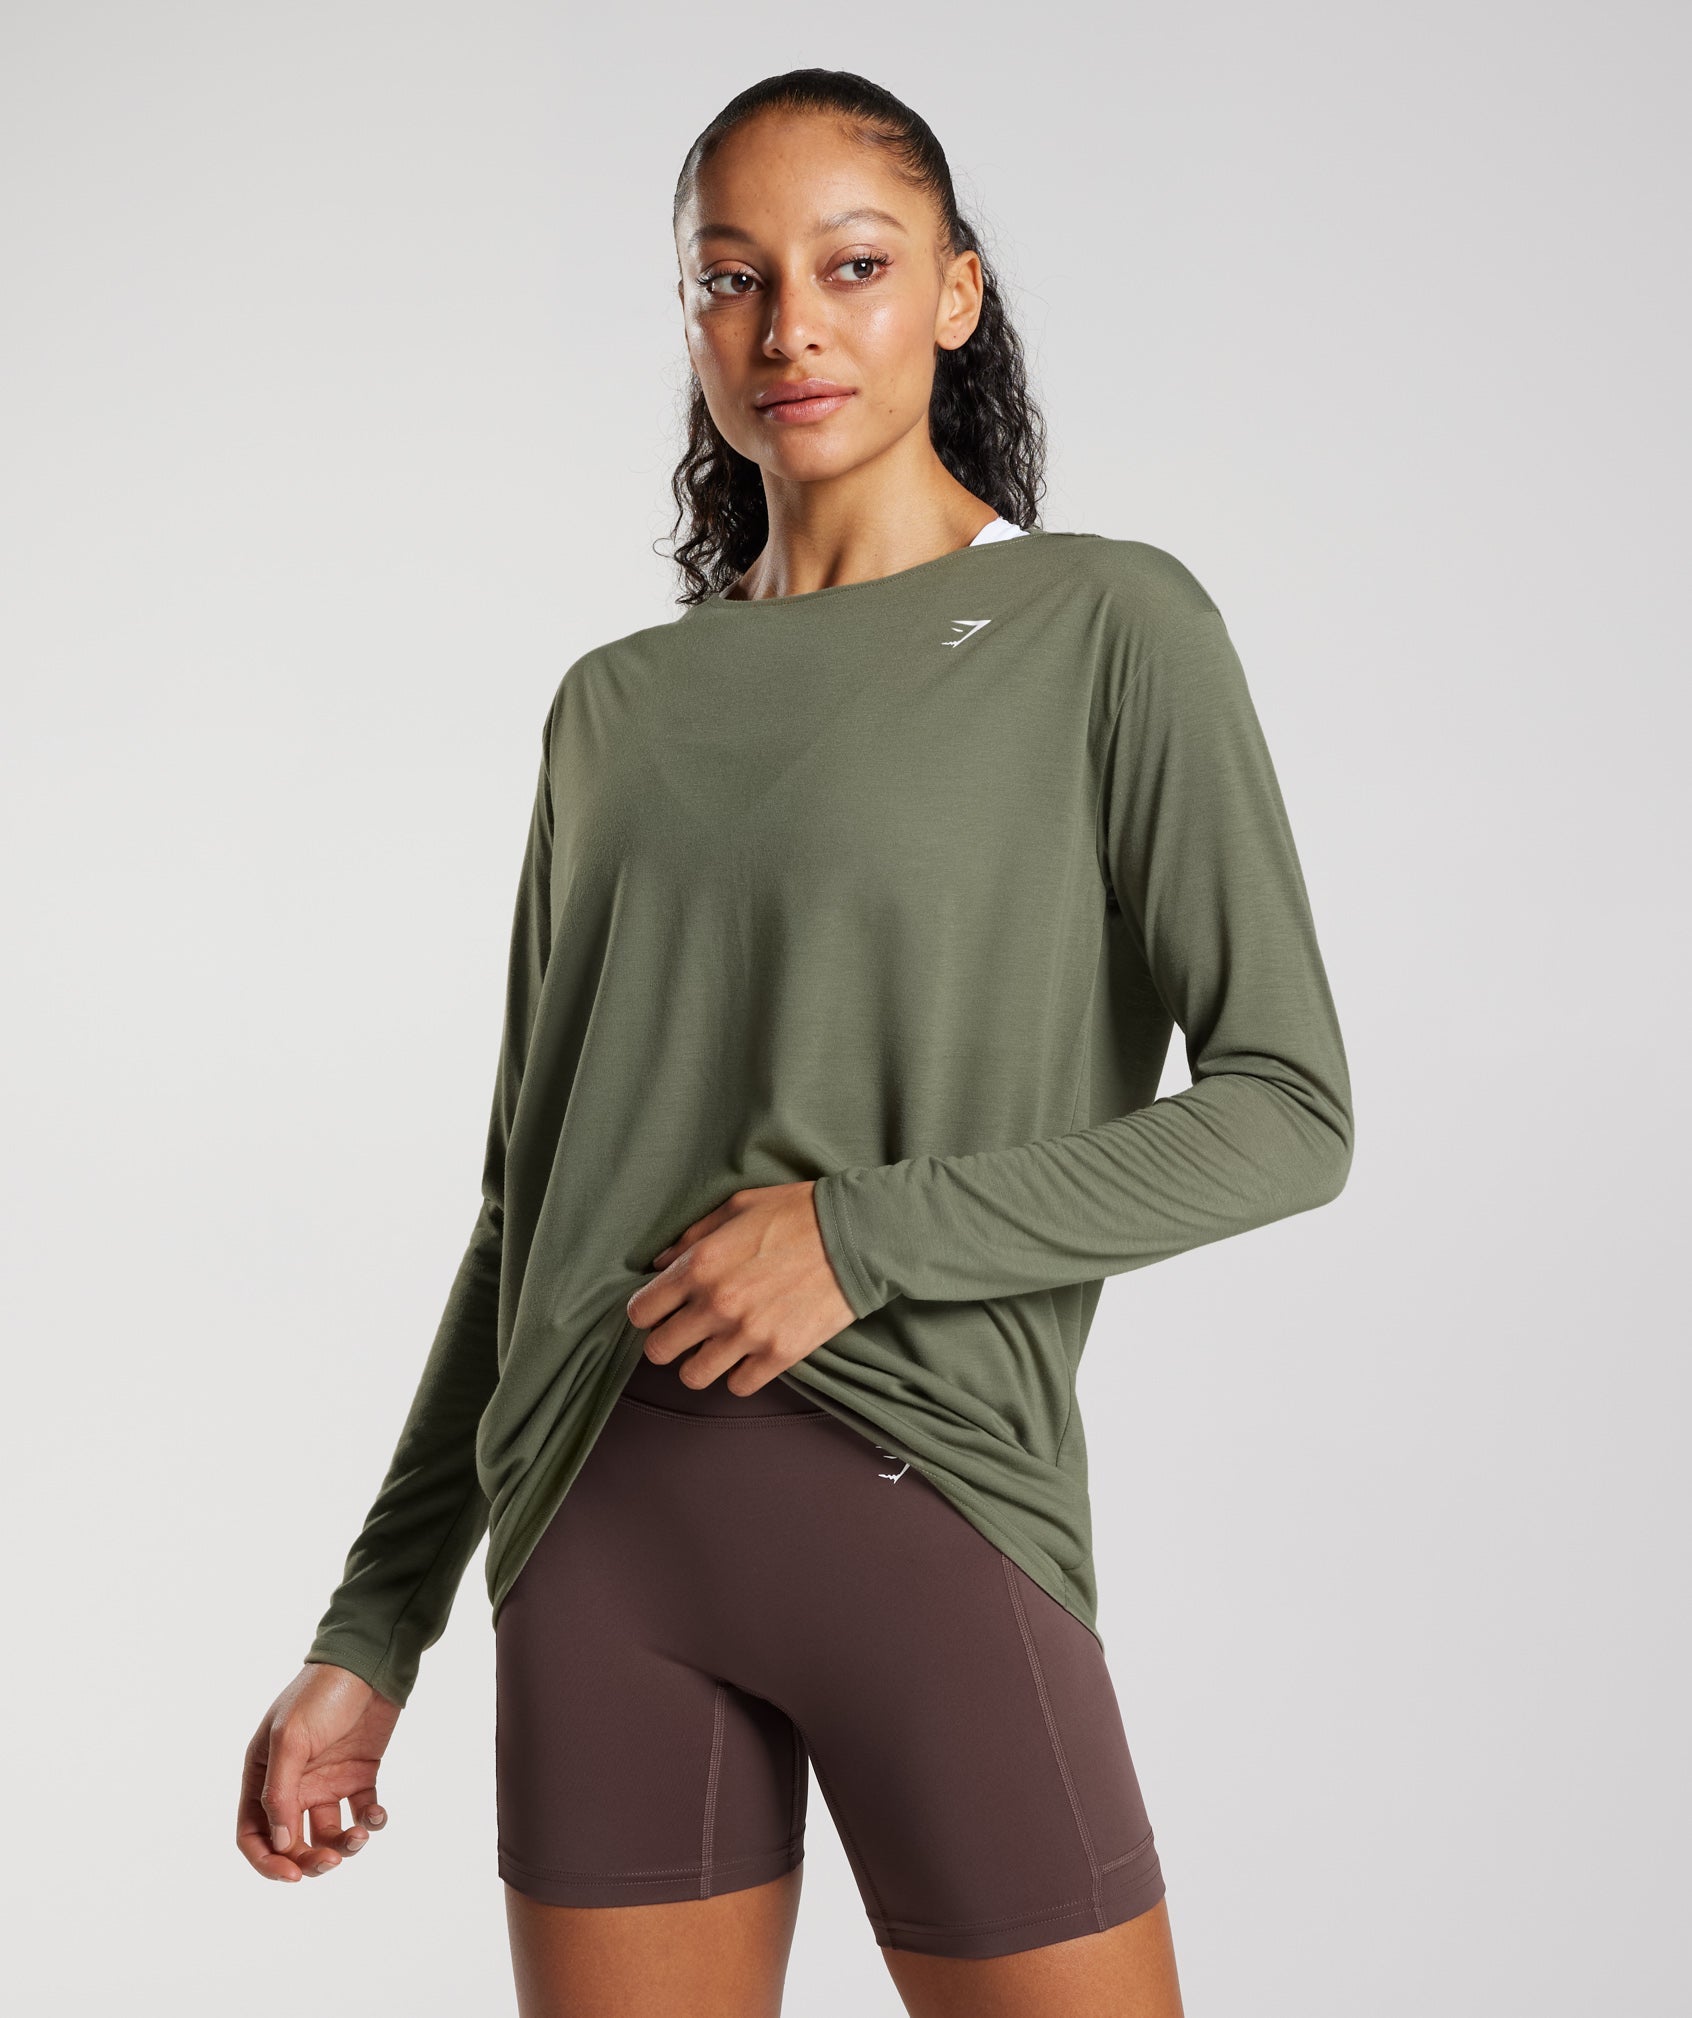 Super Soft Cut-Out Long Sleeve Top in  Dusty Olive - view 1